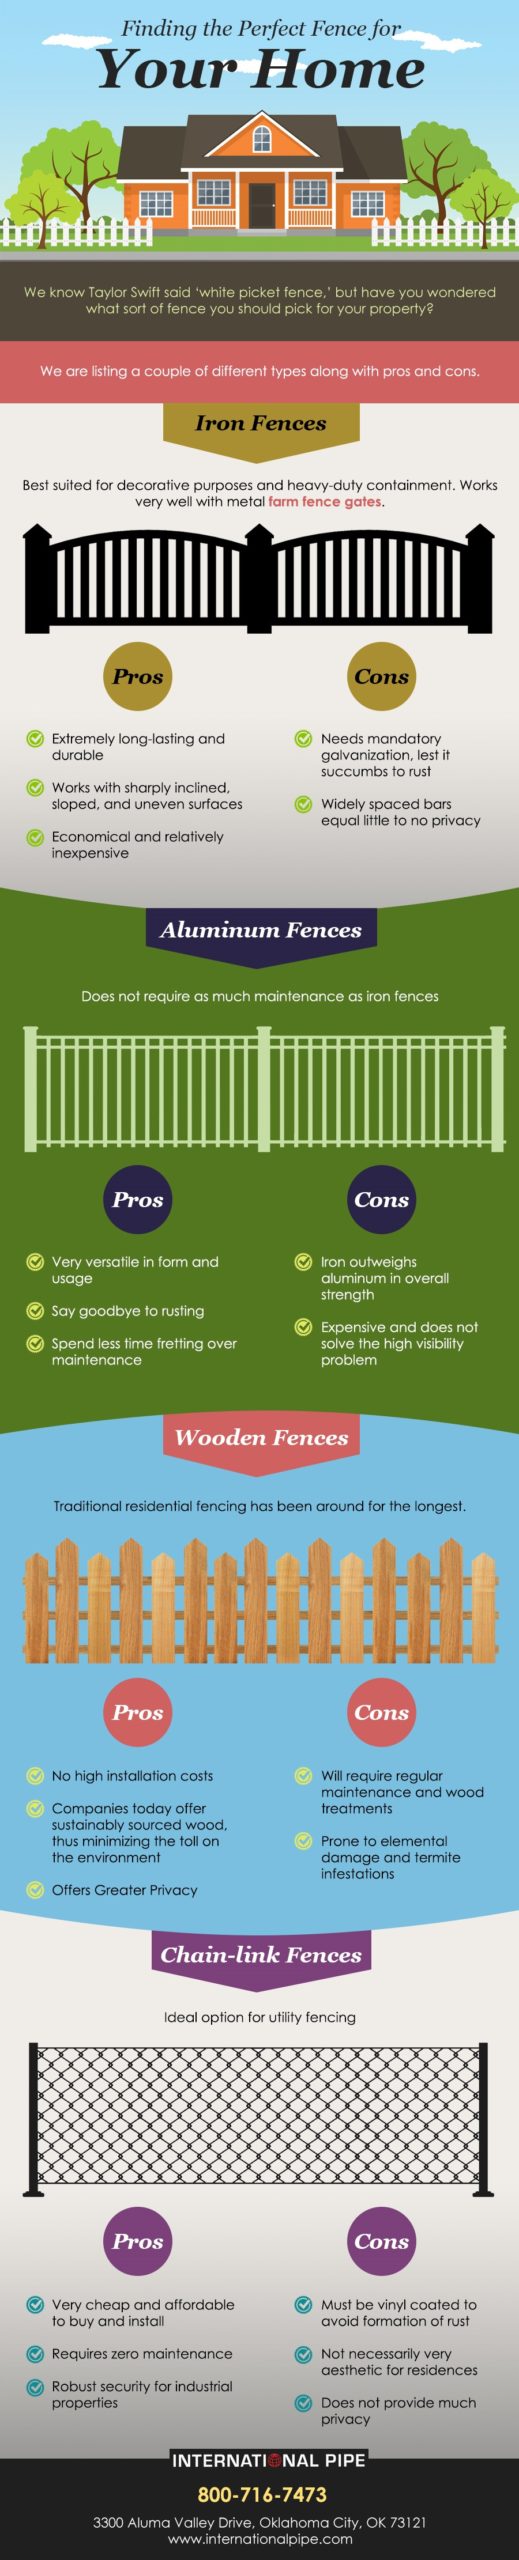 Finding The Perfect Fence For Your Home